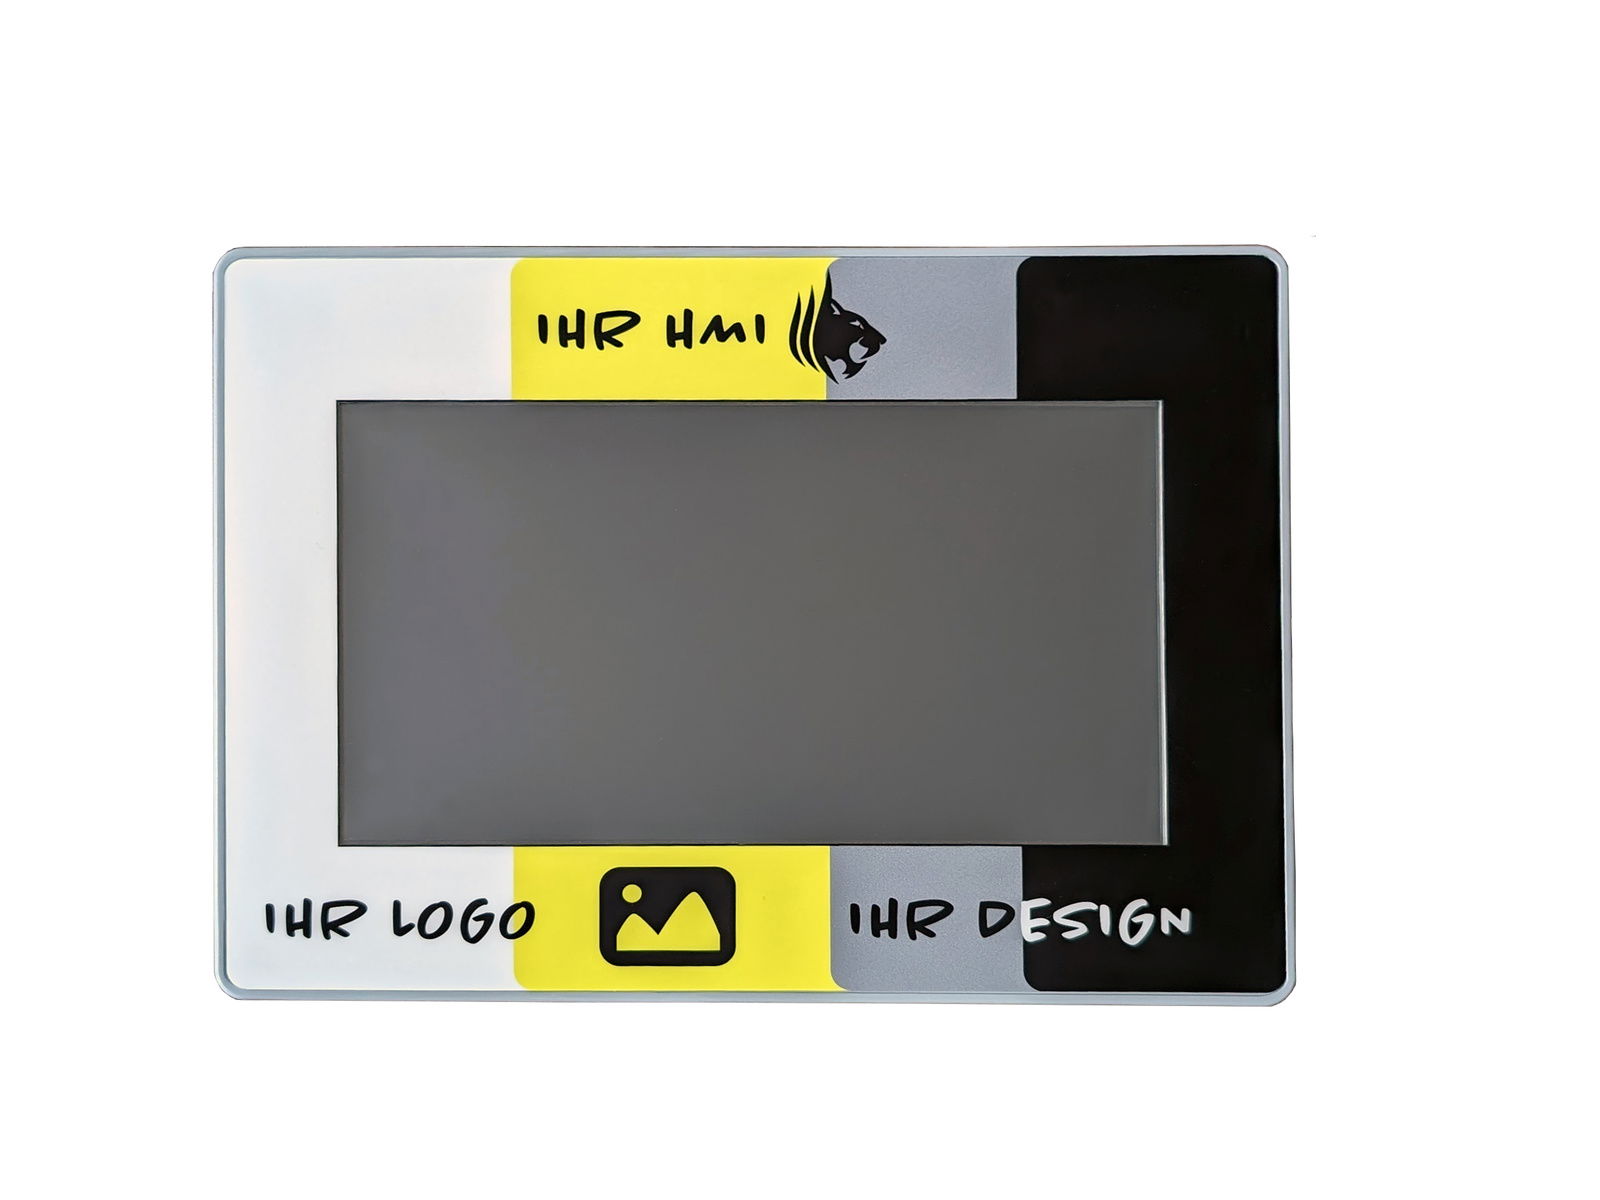 Sample HMI with specially printed front as a loan device: Kinco GT070HE 7" IoT Series Widescreen HMI touch panel